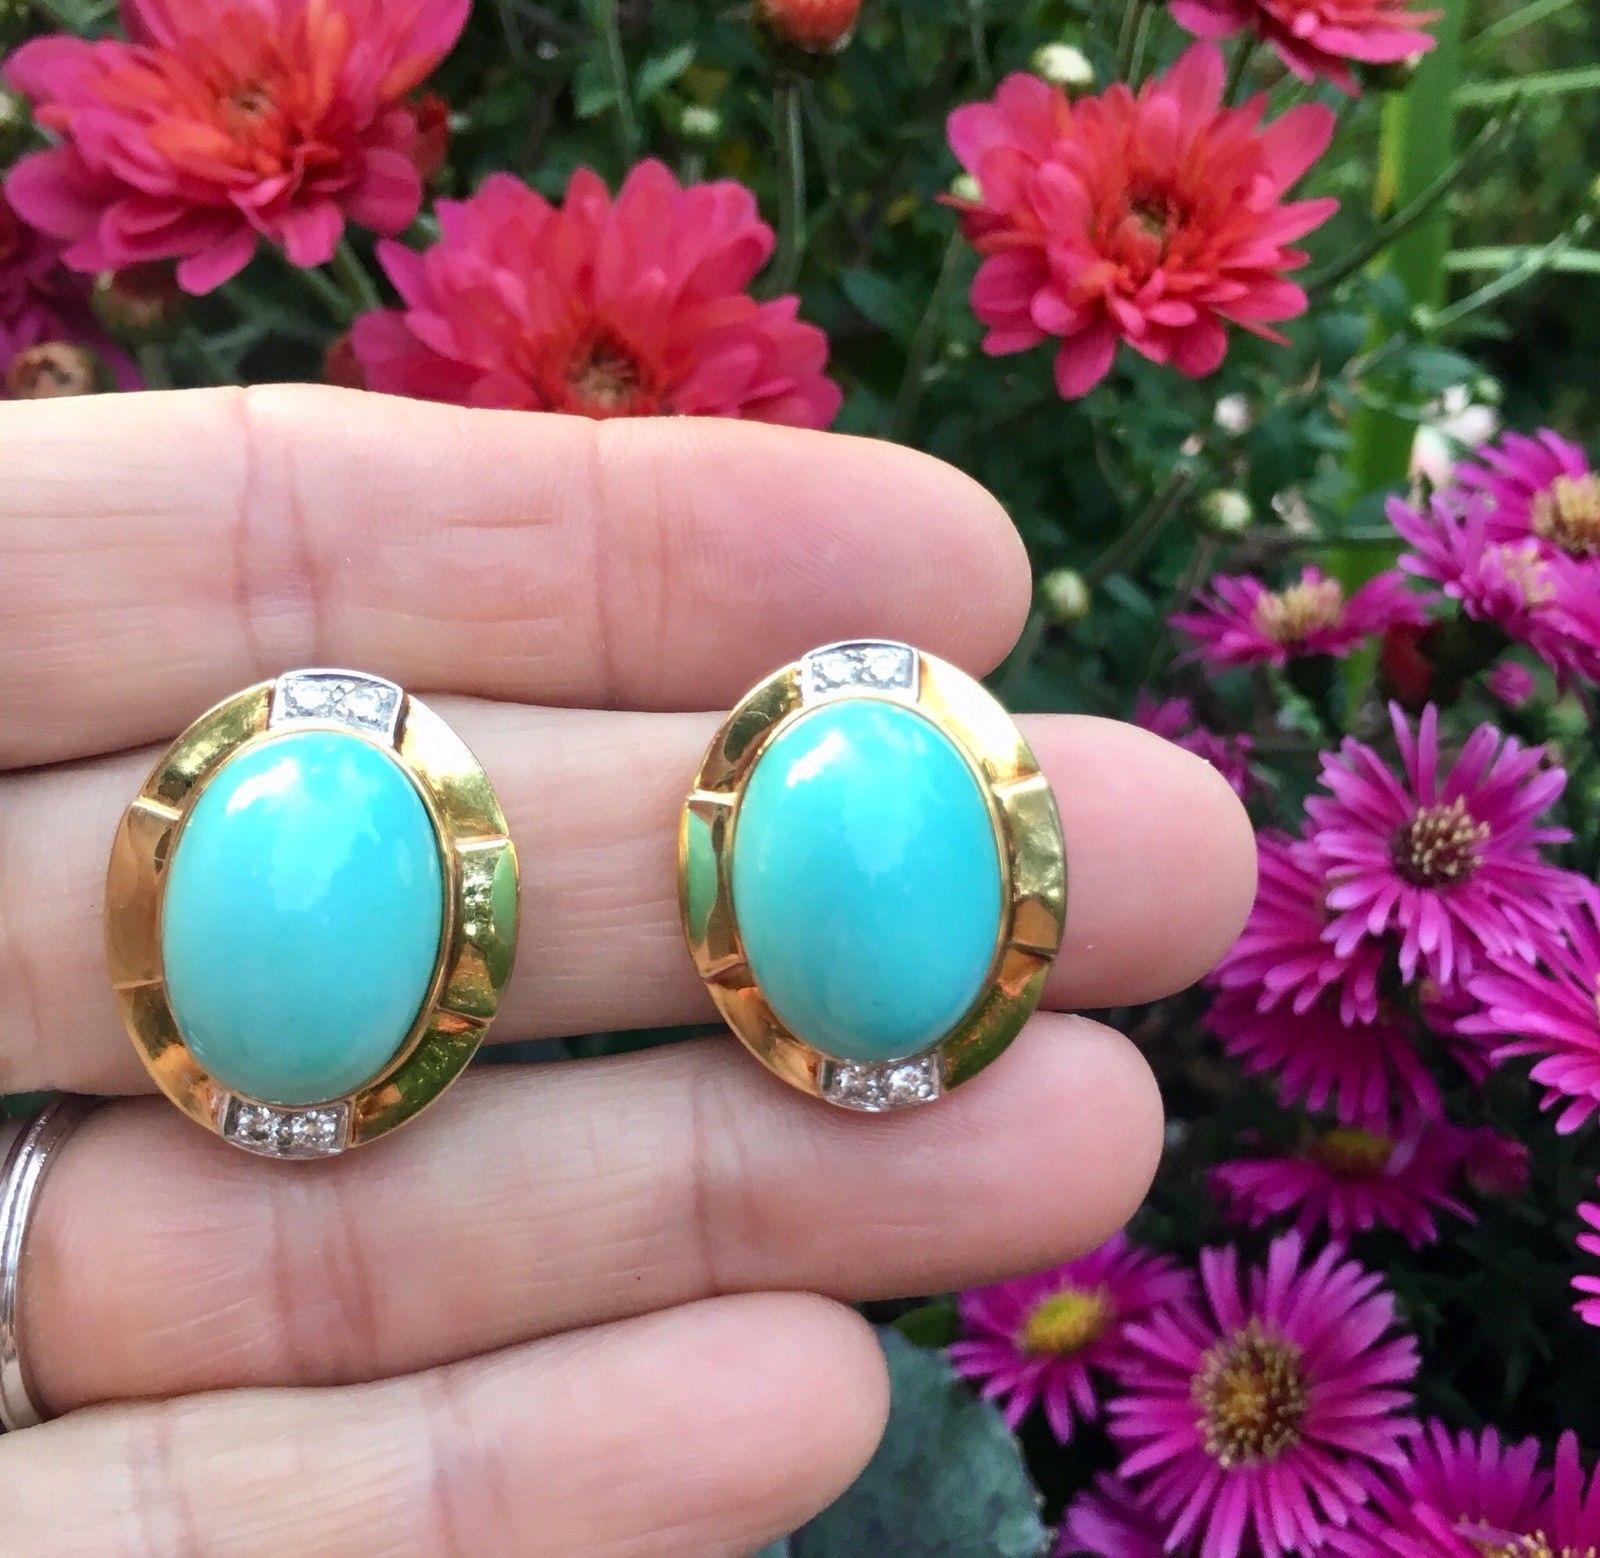 Stunning R. Stone 1970s Estate 18K Gold Turquoise Diamond Earrings

These beautiful earrings feature two gorgeous pale blue robins egg Persian turquoise cabochons, each set in an 18k gold surround featuring 0.32 carats of G/VS round brilliant